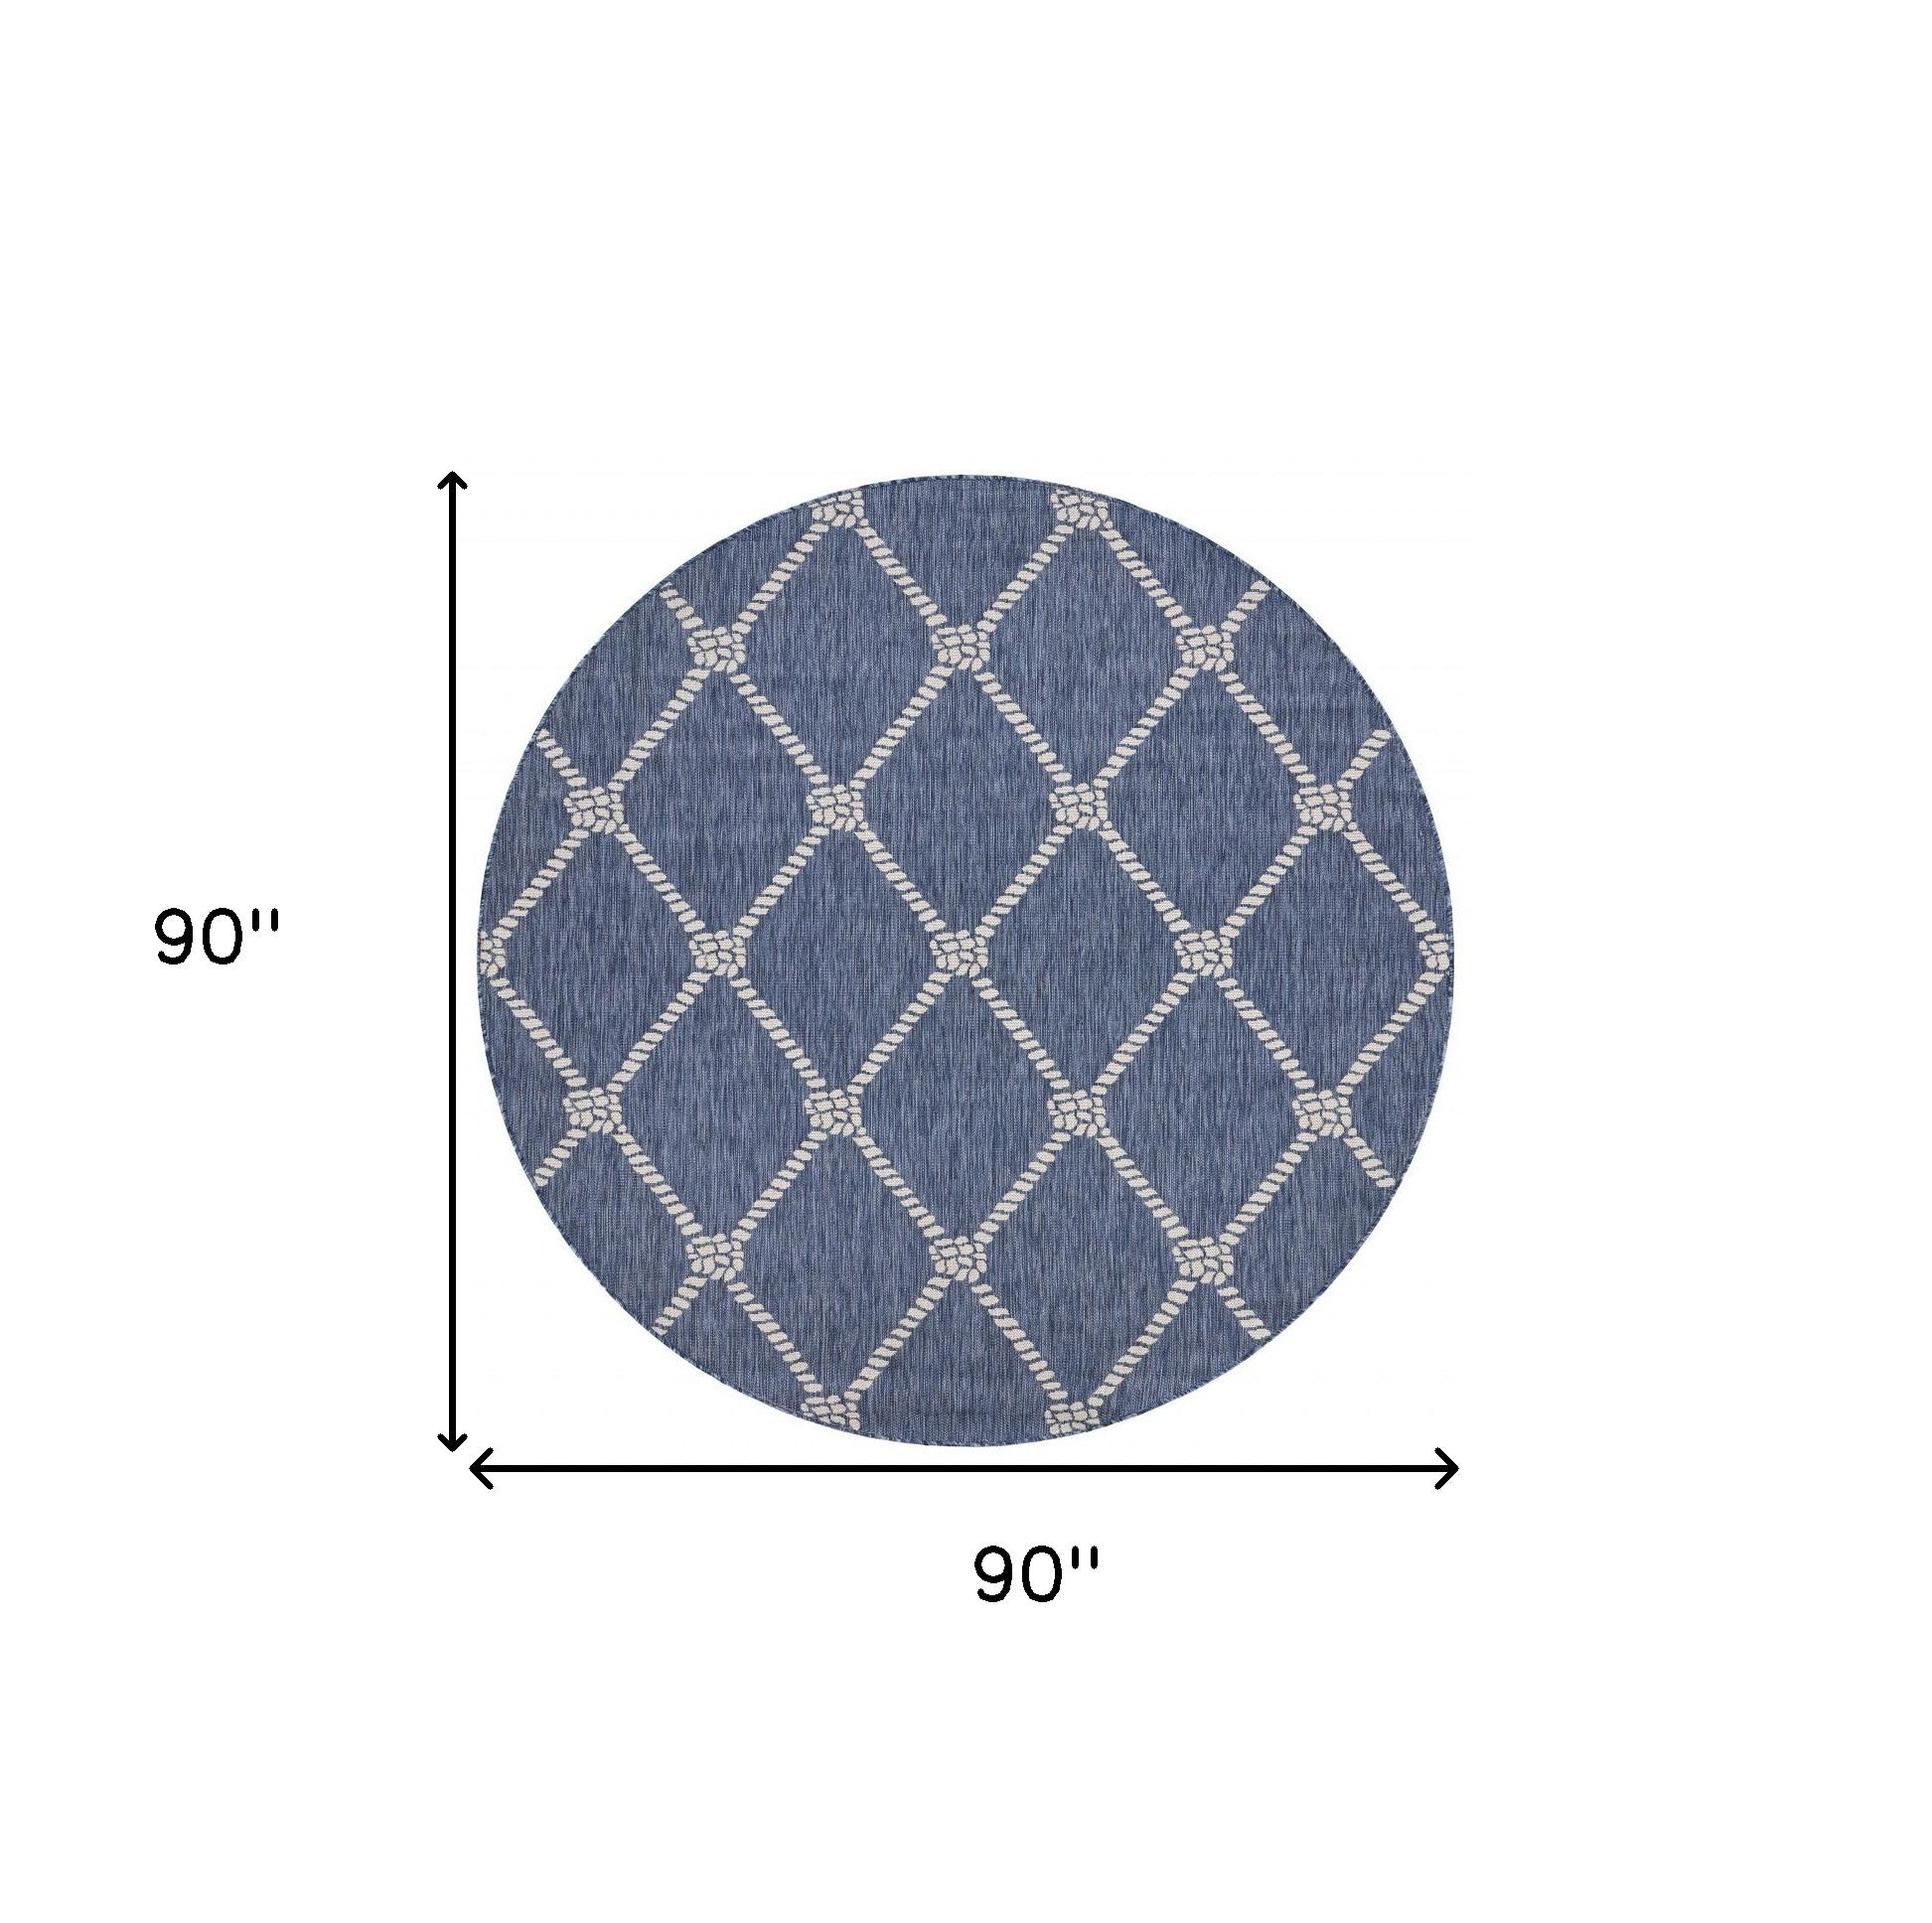 8' Round Blue And Gray Round Indoor Outdoor Area Rug